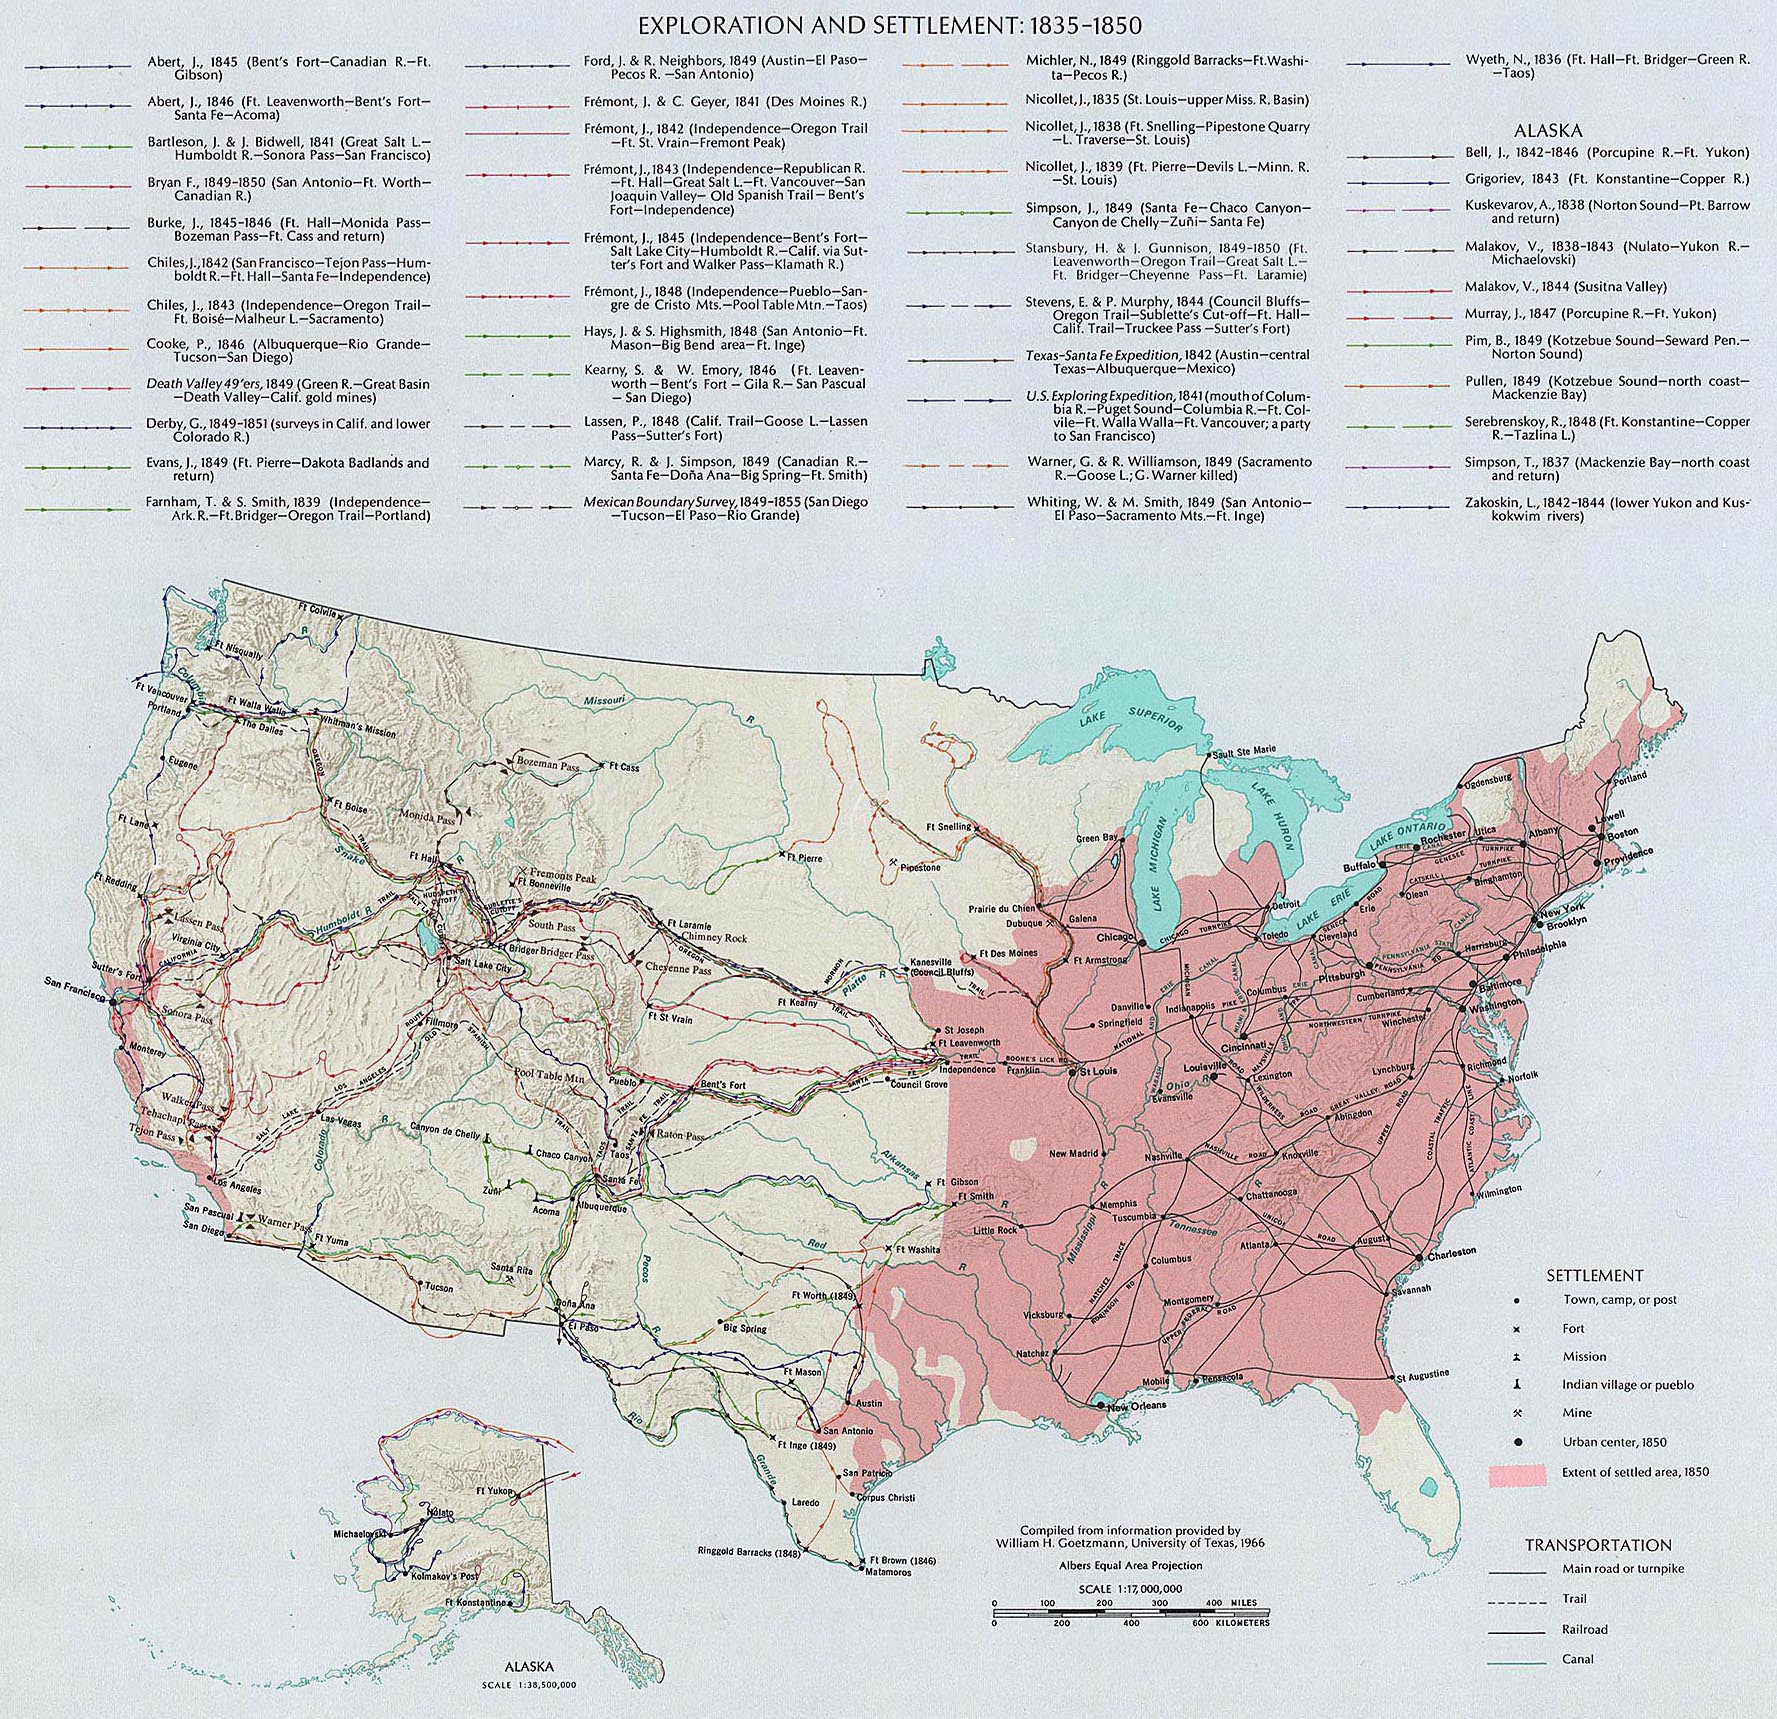 Map of the United States - Exploration and Settlement 1835-1850